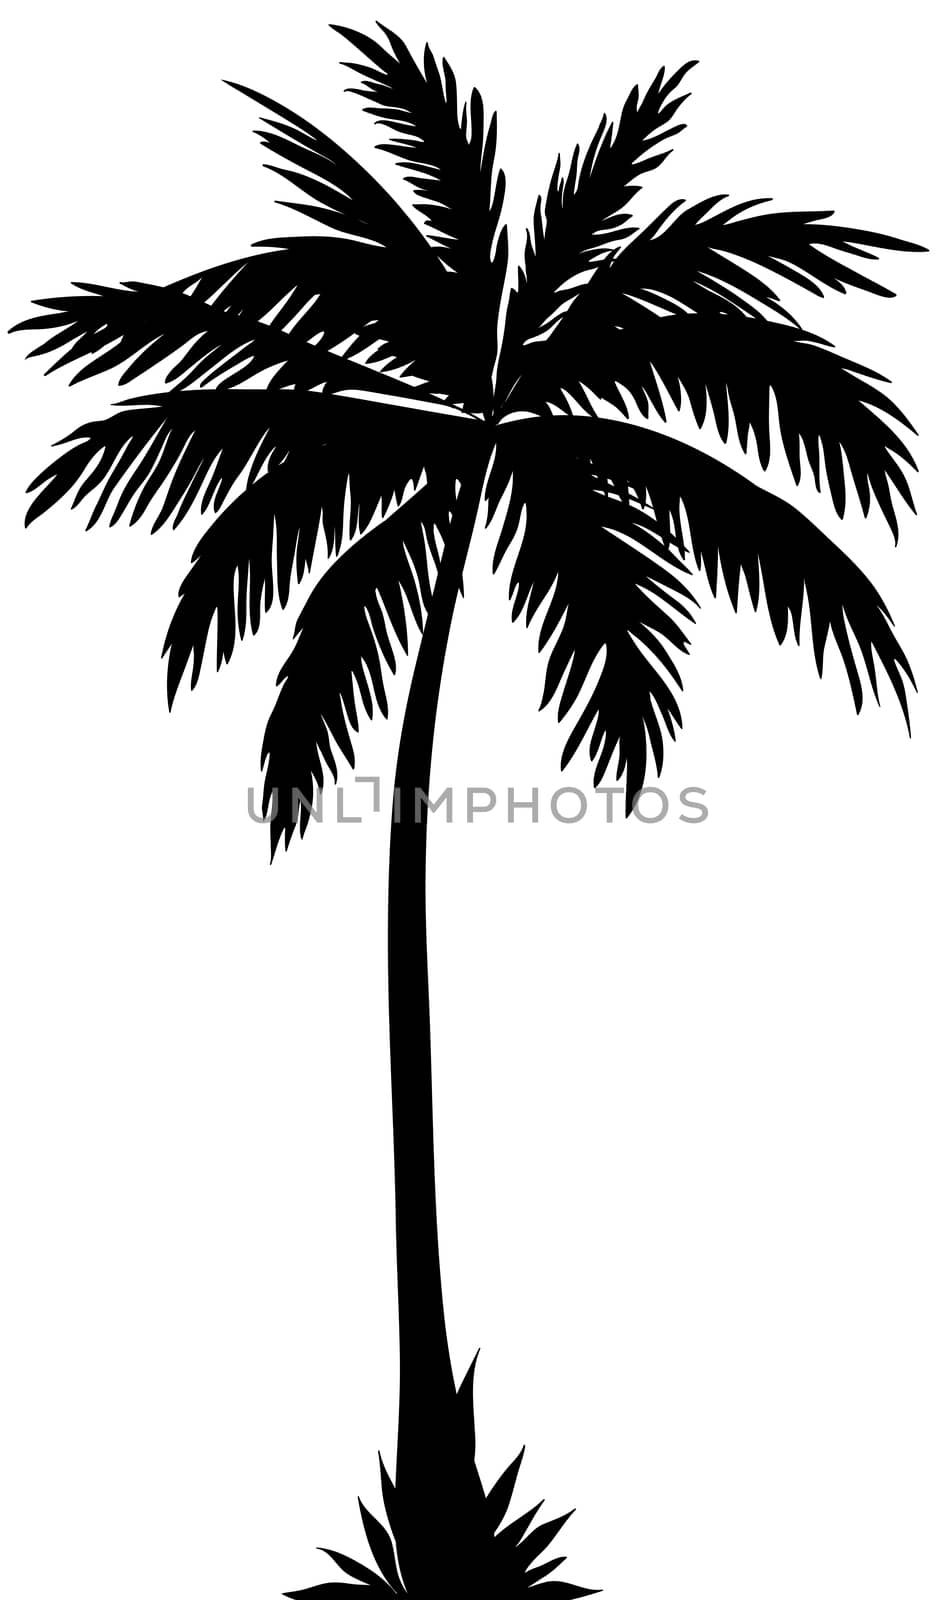 Black silhouette of a tropical palm tree on a white background.Texture or background